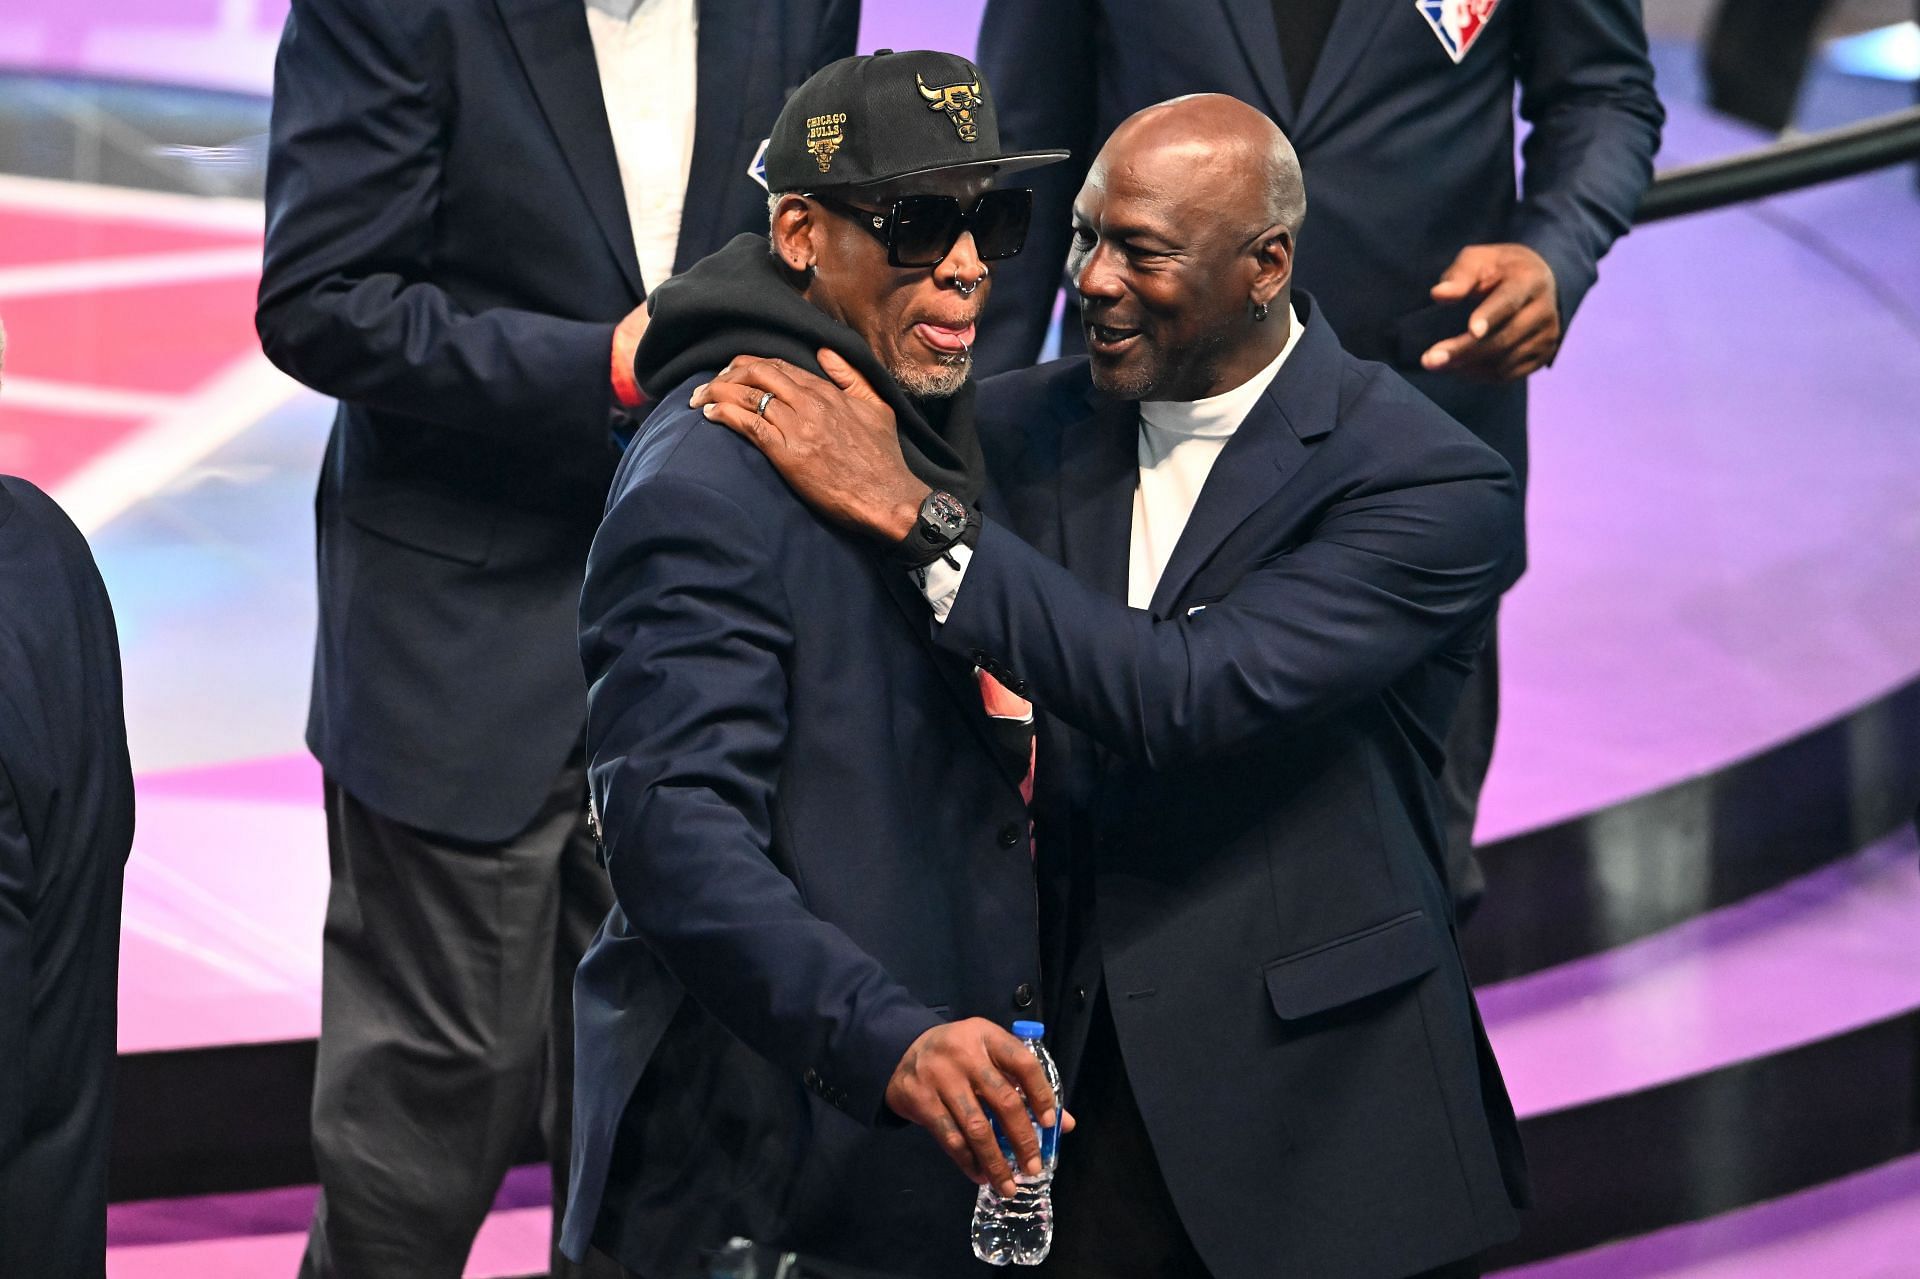 Dennis Rodman, left, and Michael Jordan pose for photos after the introduction of the NBA 75th Anniversary Team during the All-Star Game Feb. 20 in Cleveland, Ohio.